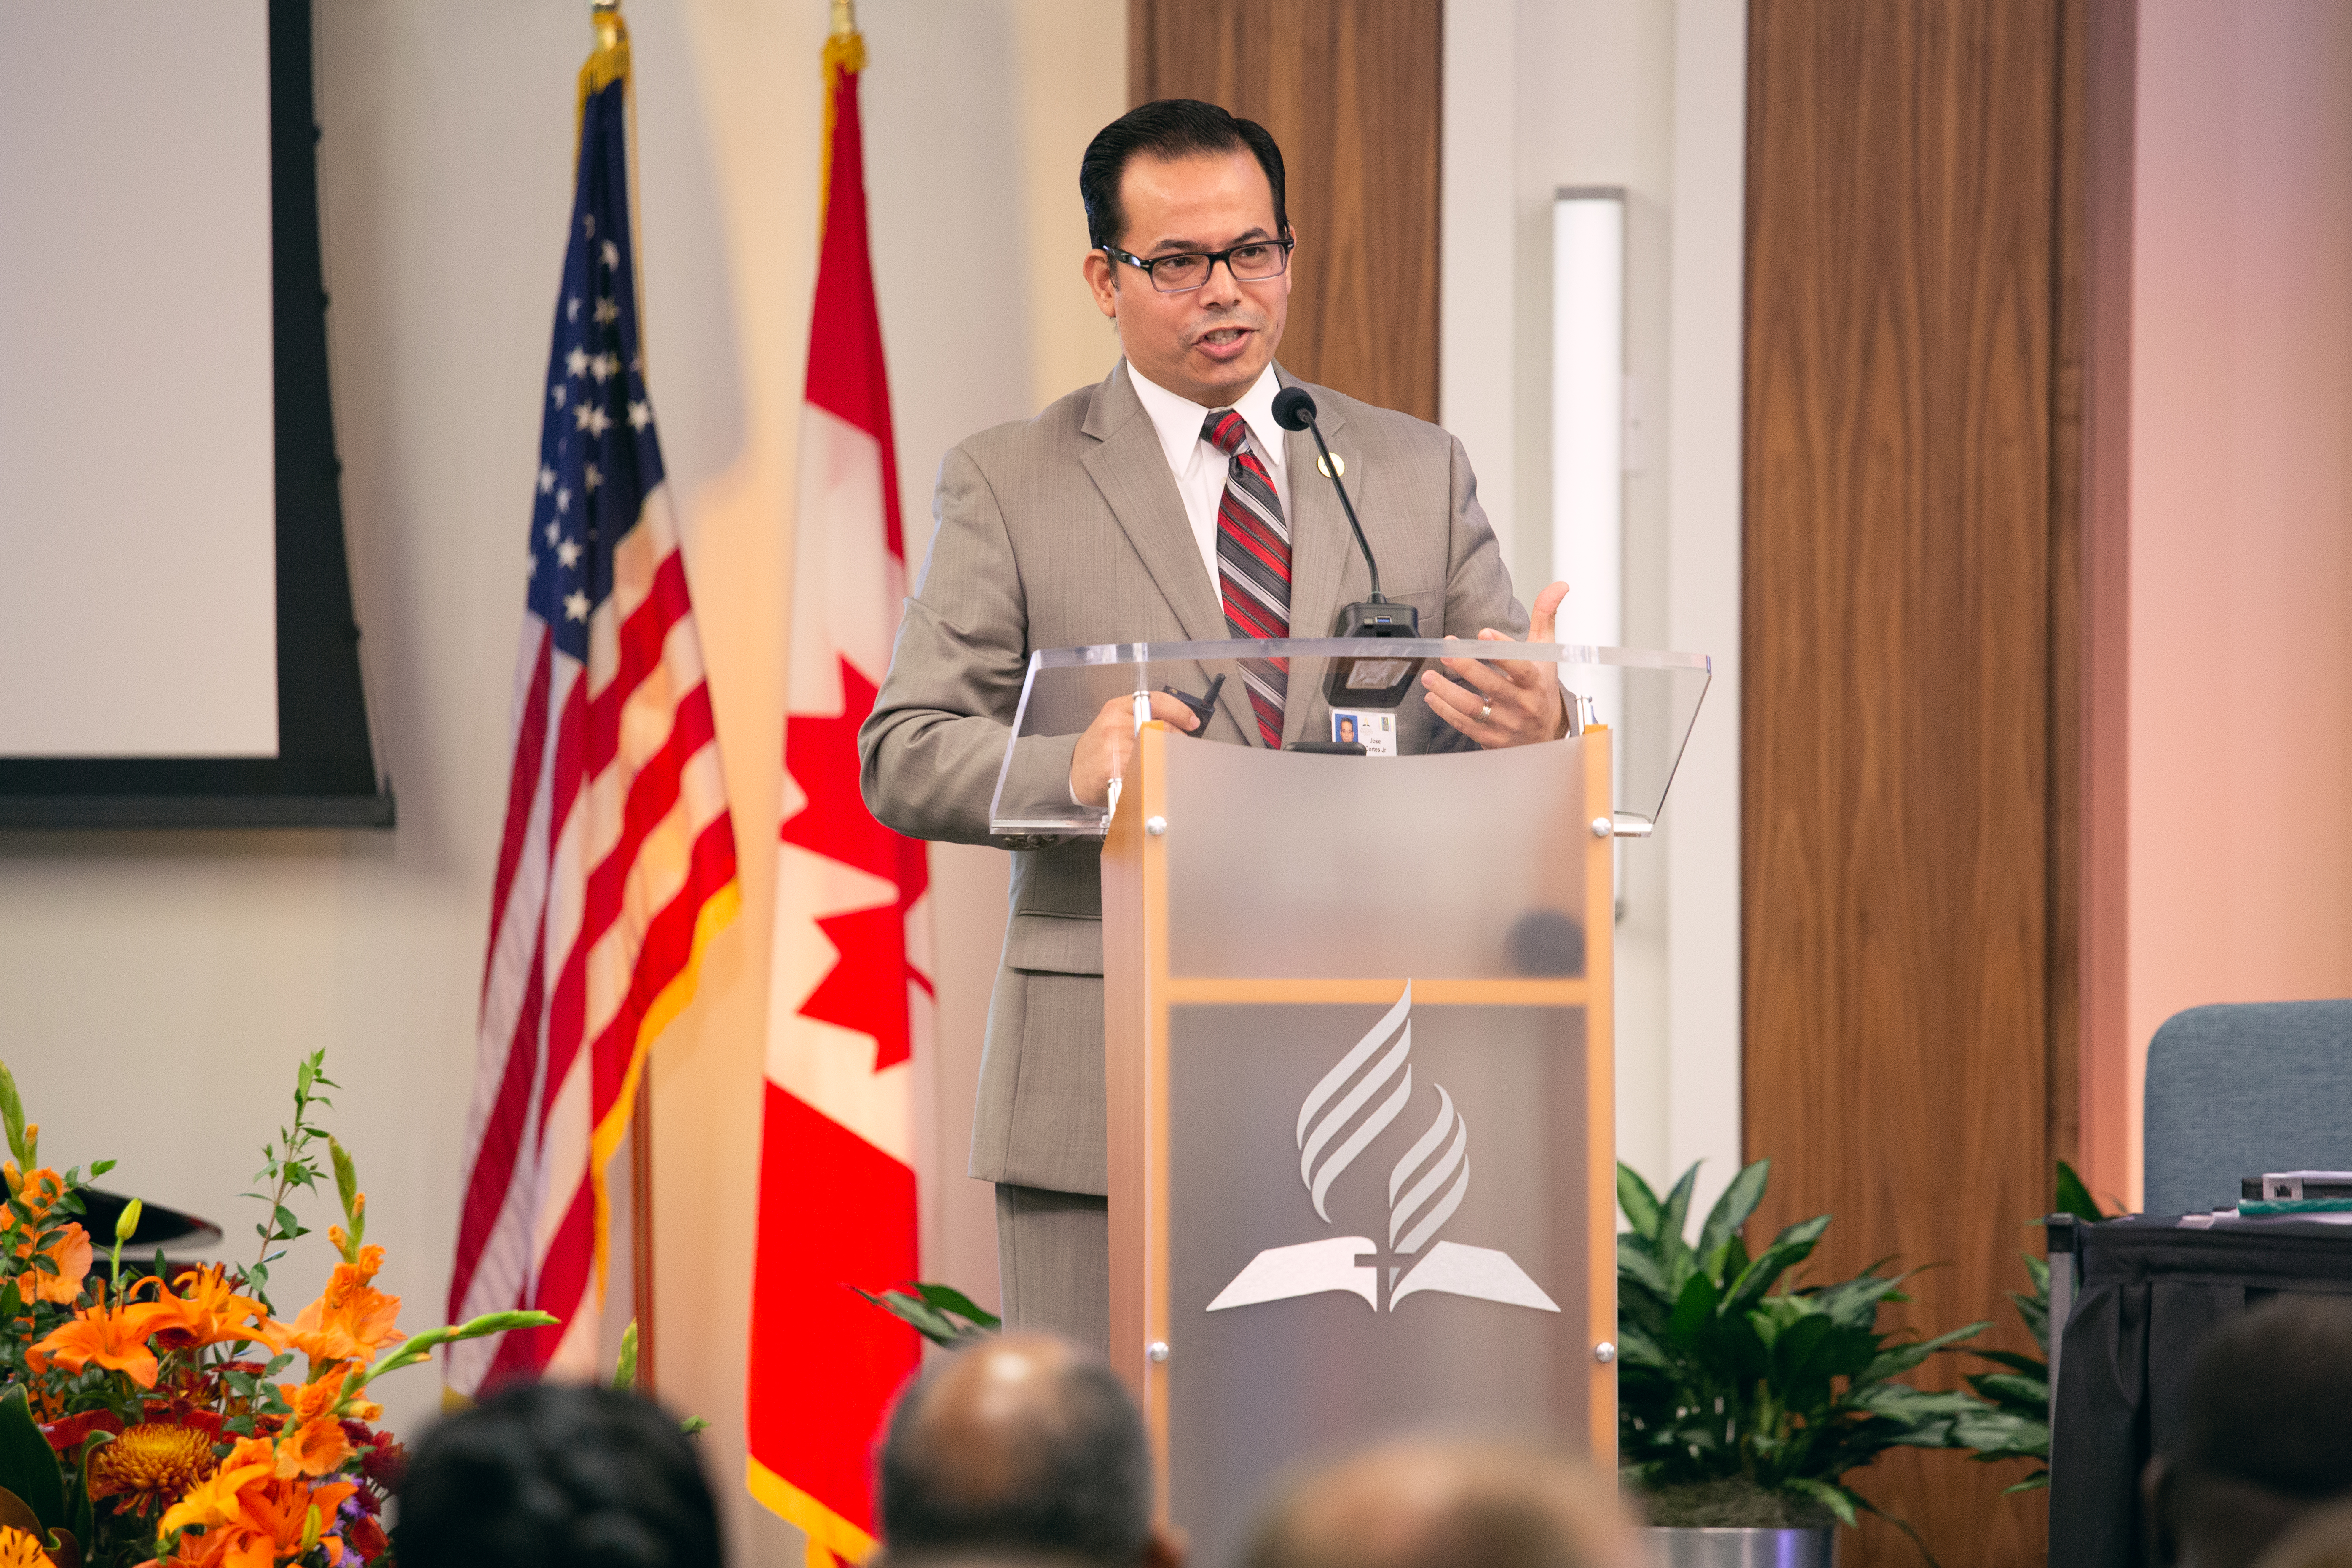 Jose Cortes makes case for church planting.